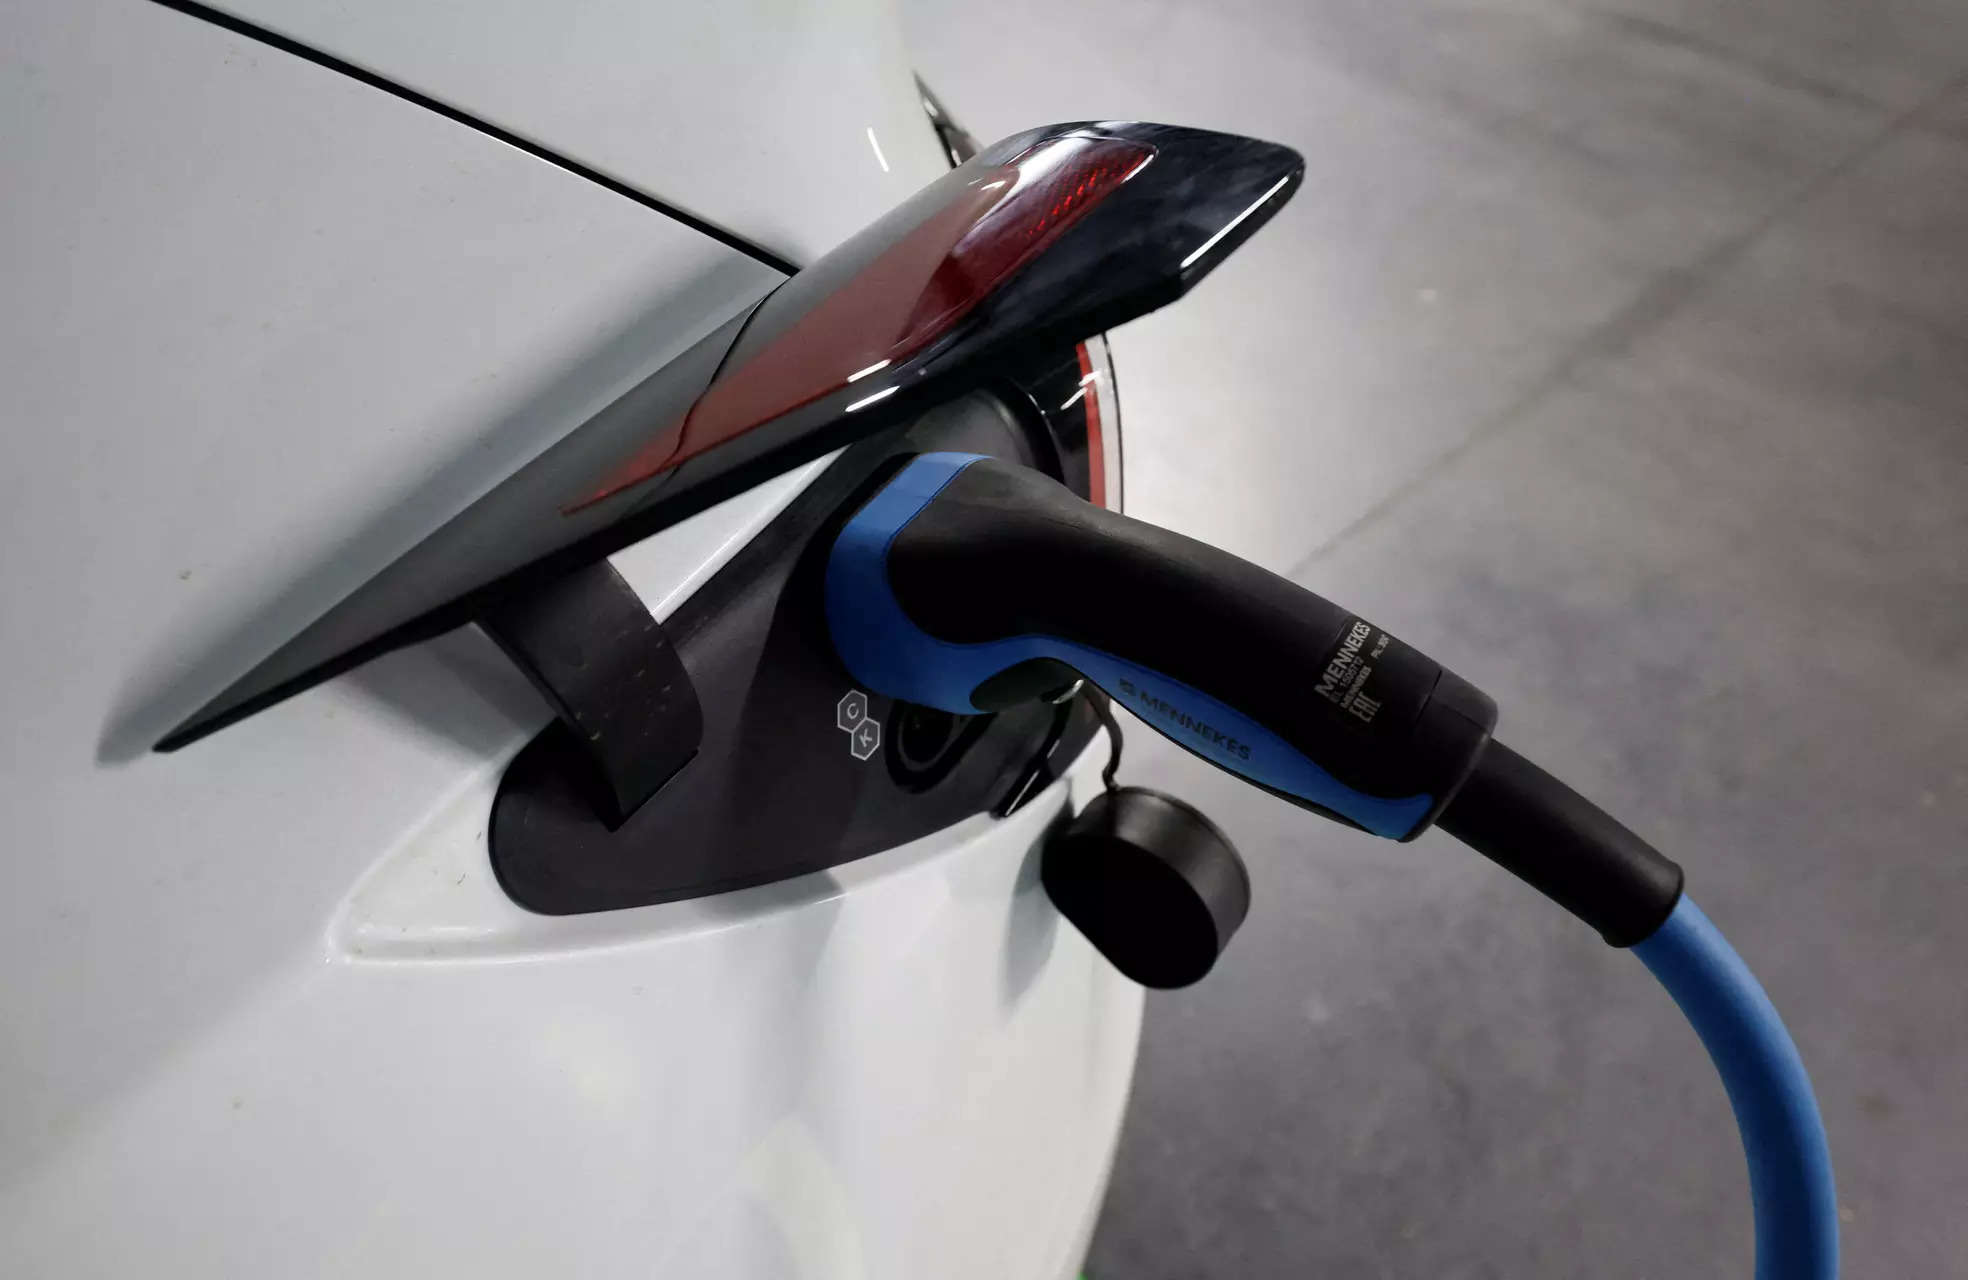 <p>Both Renault and Stellantis have stressed their EV cost-cutting efforts this month while Mercedes toned down expectations for EV demand and said it will update its traditional lineup well into the next decade. </p>